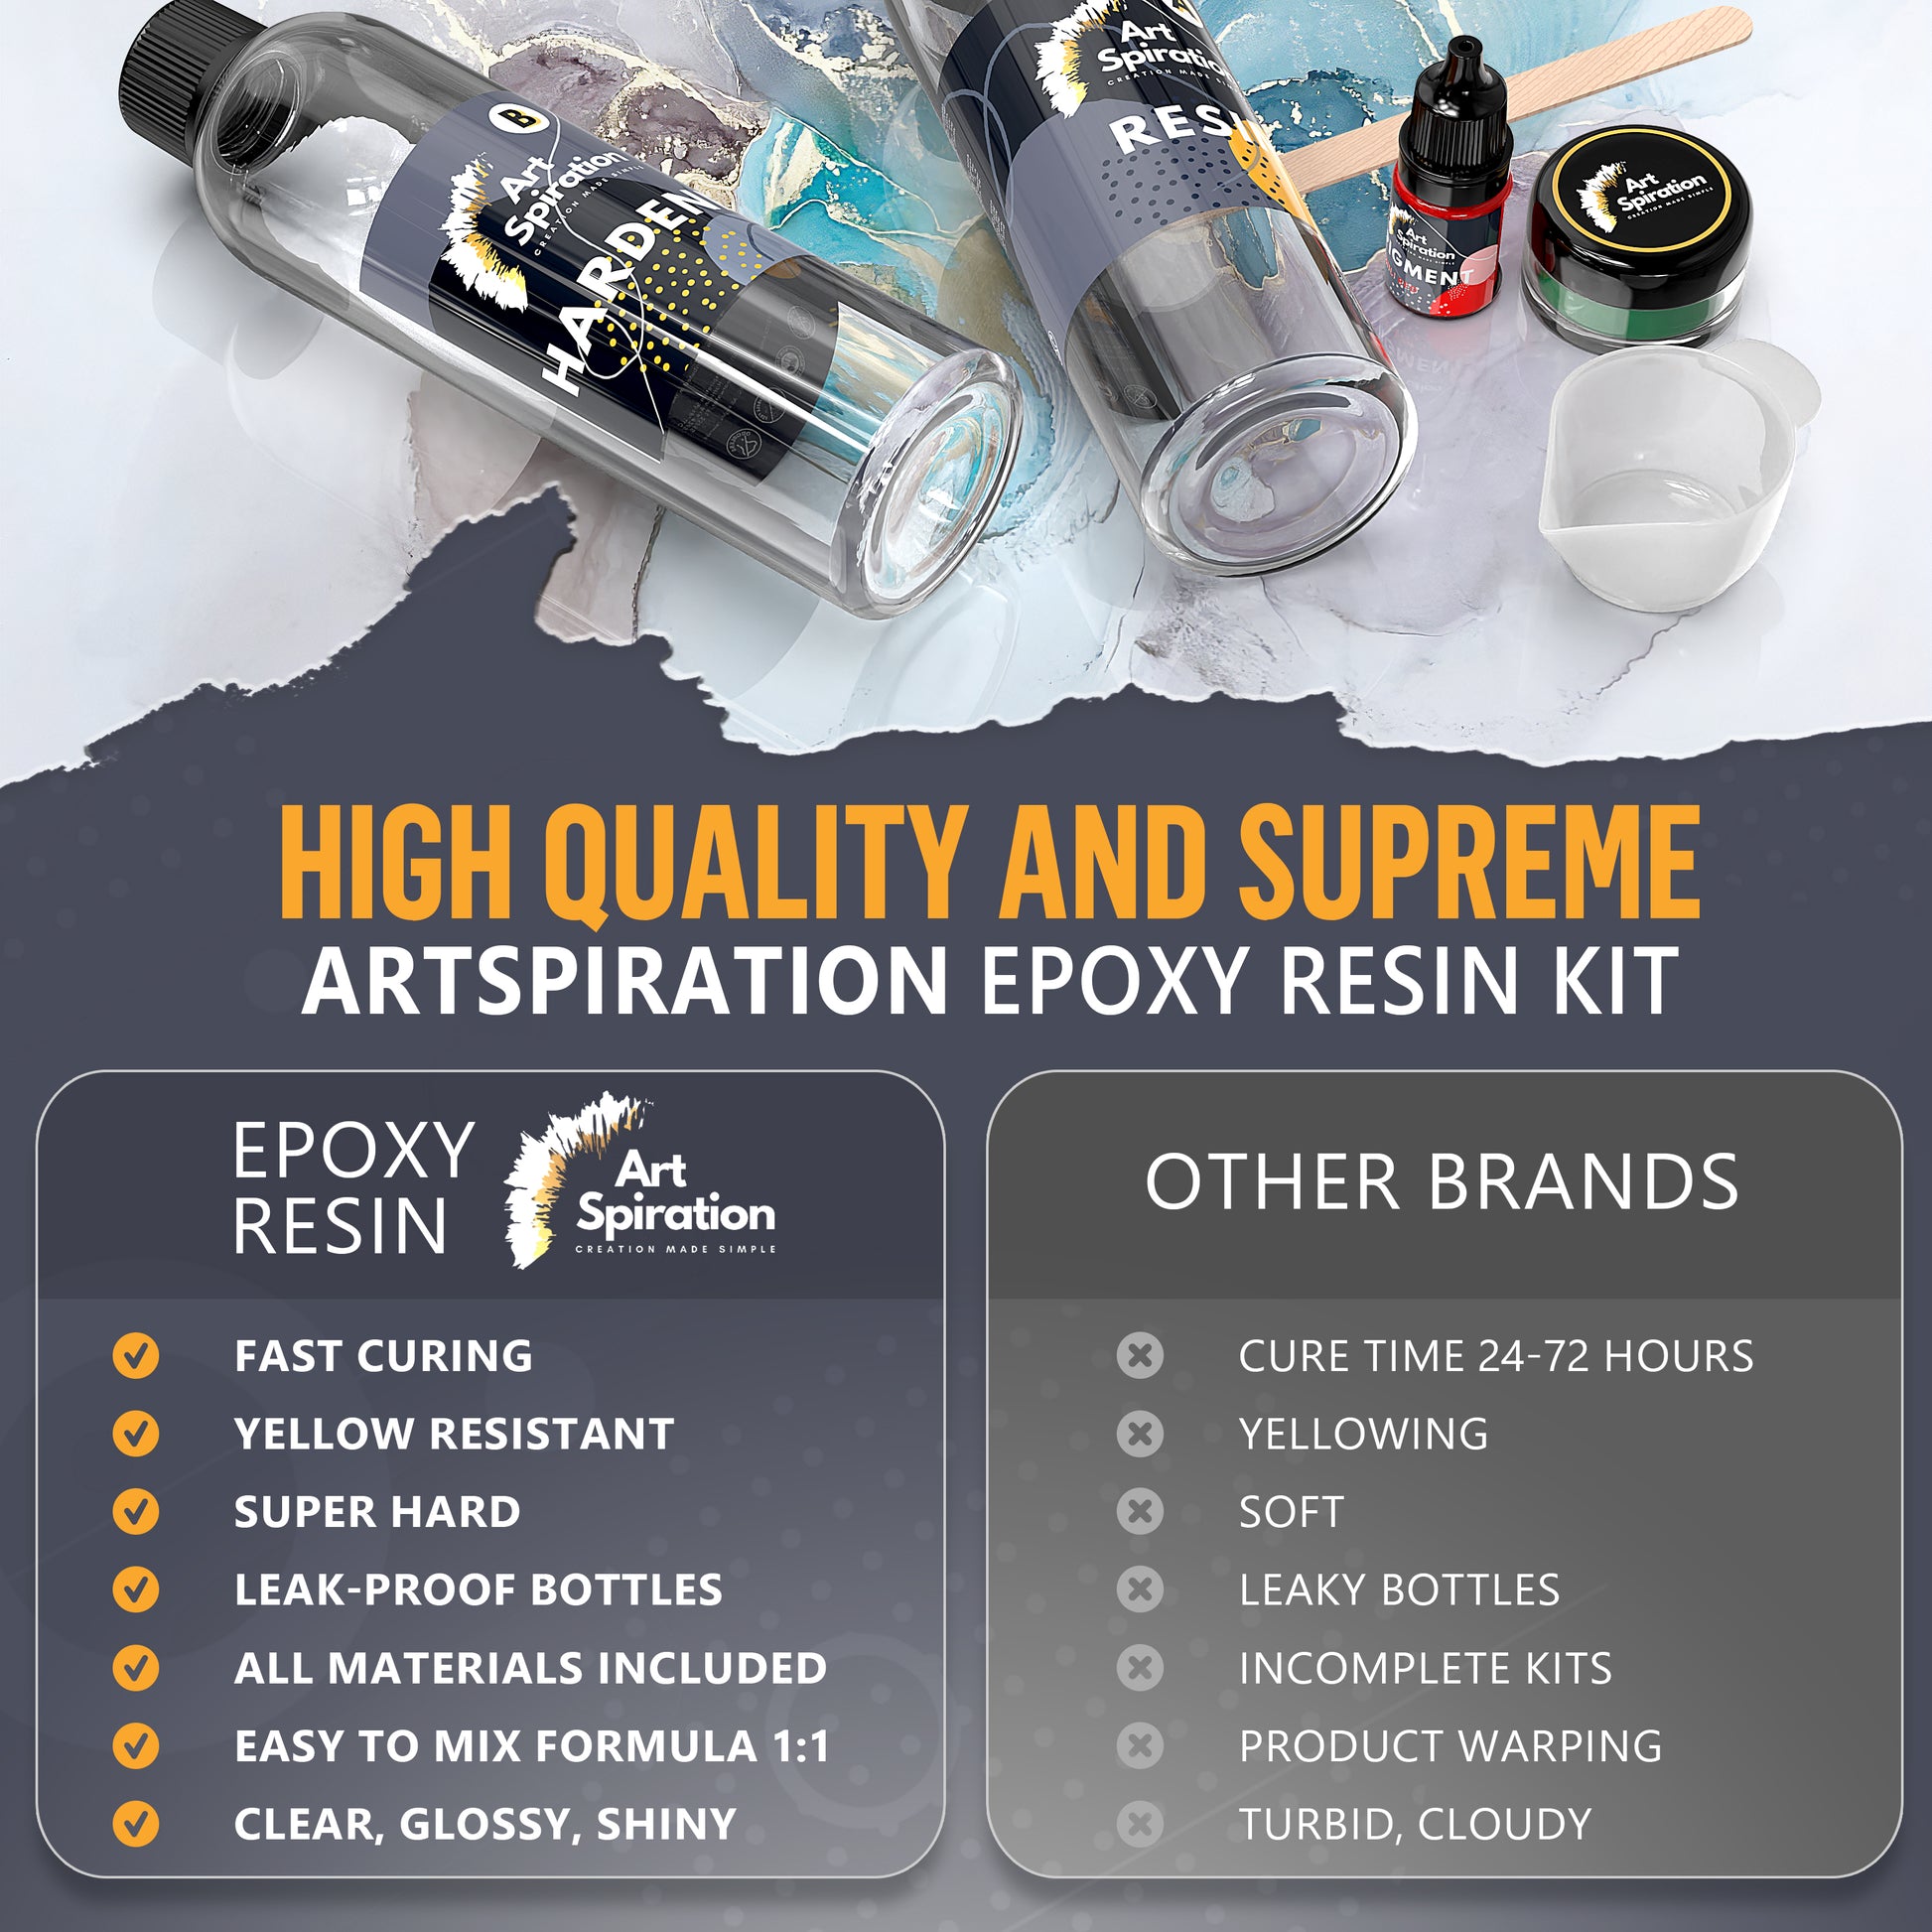 Epoxy Resin Art Kit – 750g Kit, 500g Crystal Clear Resin & Hardener 250g, Resin Art Material For Art and Craft, DIY, Home Decor Projects